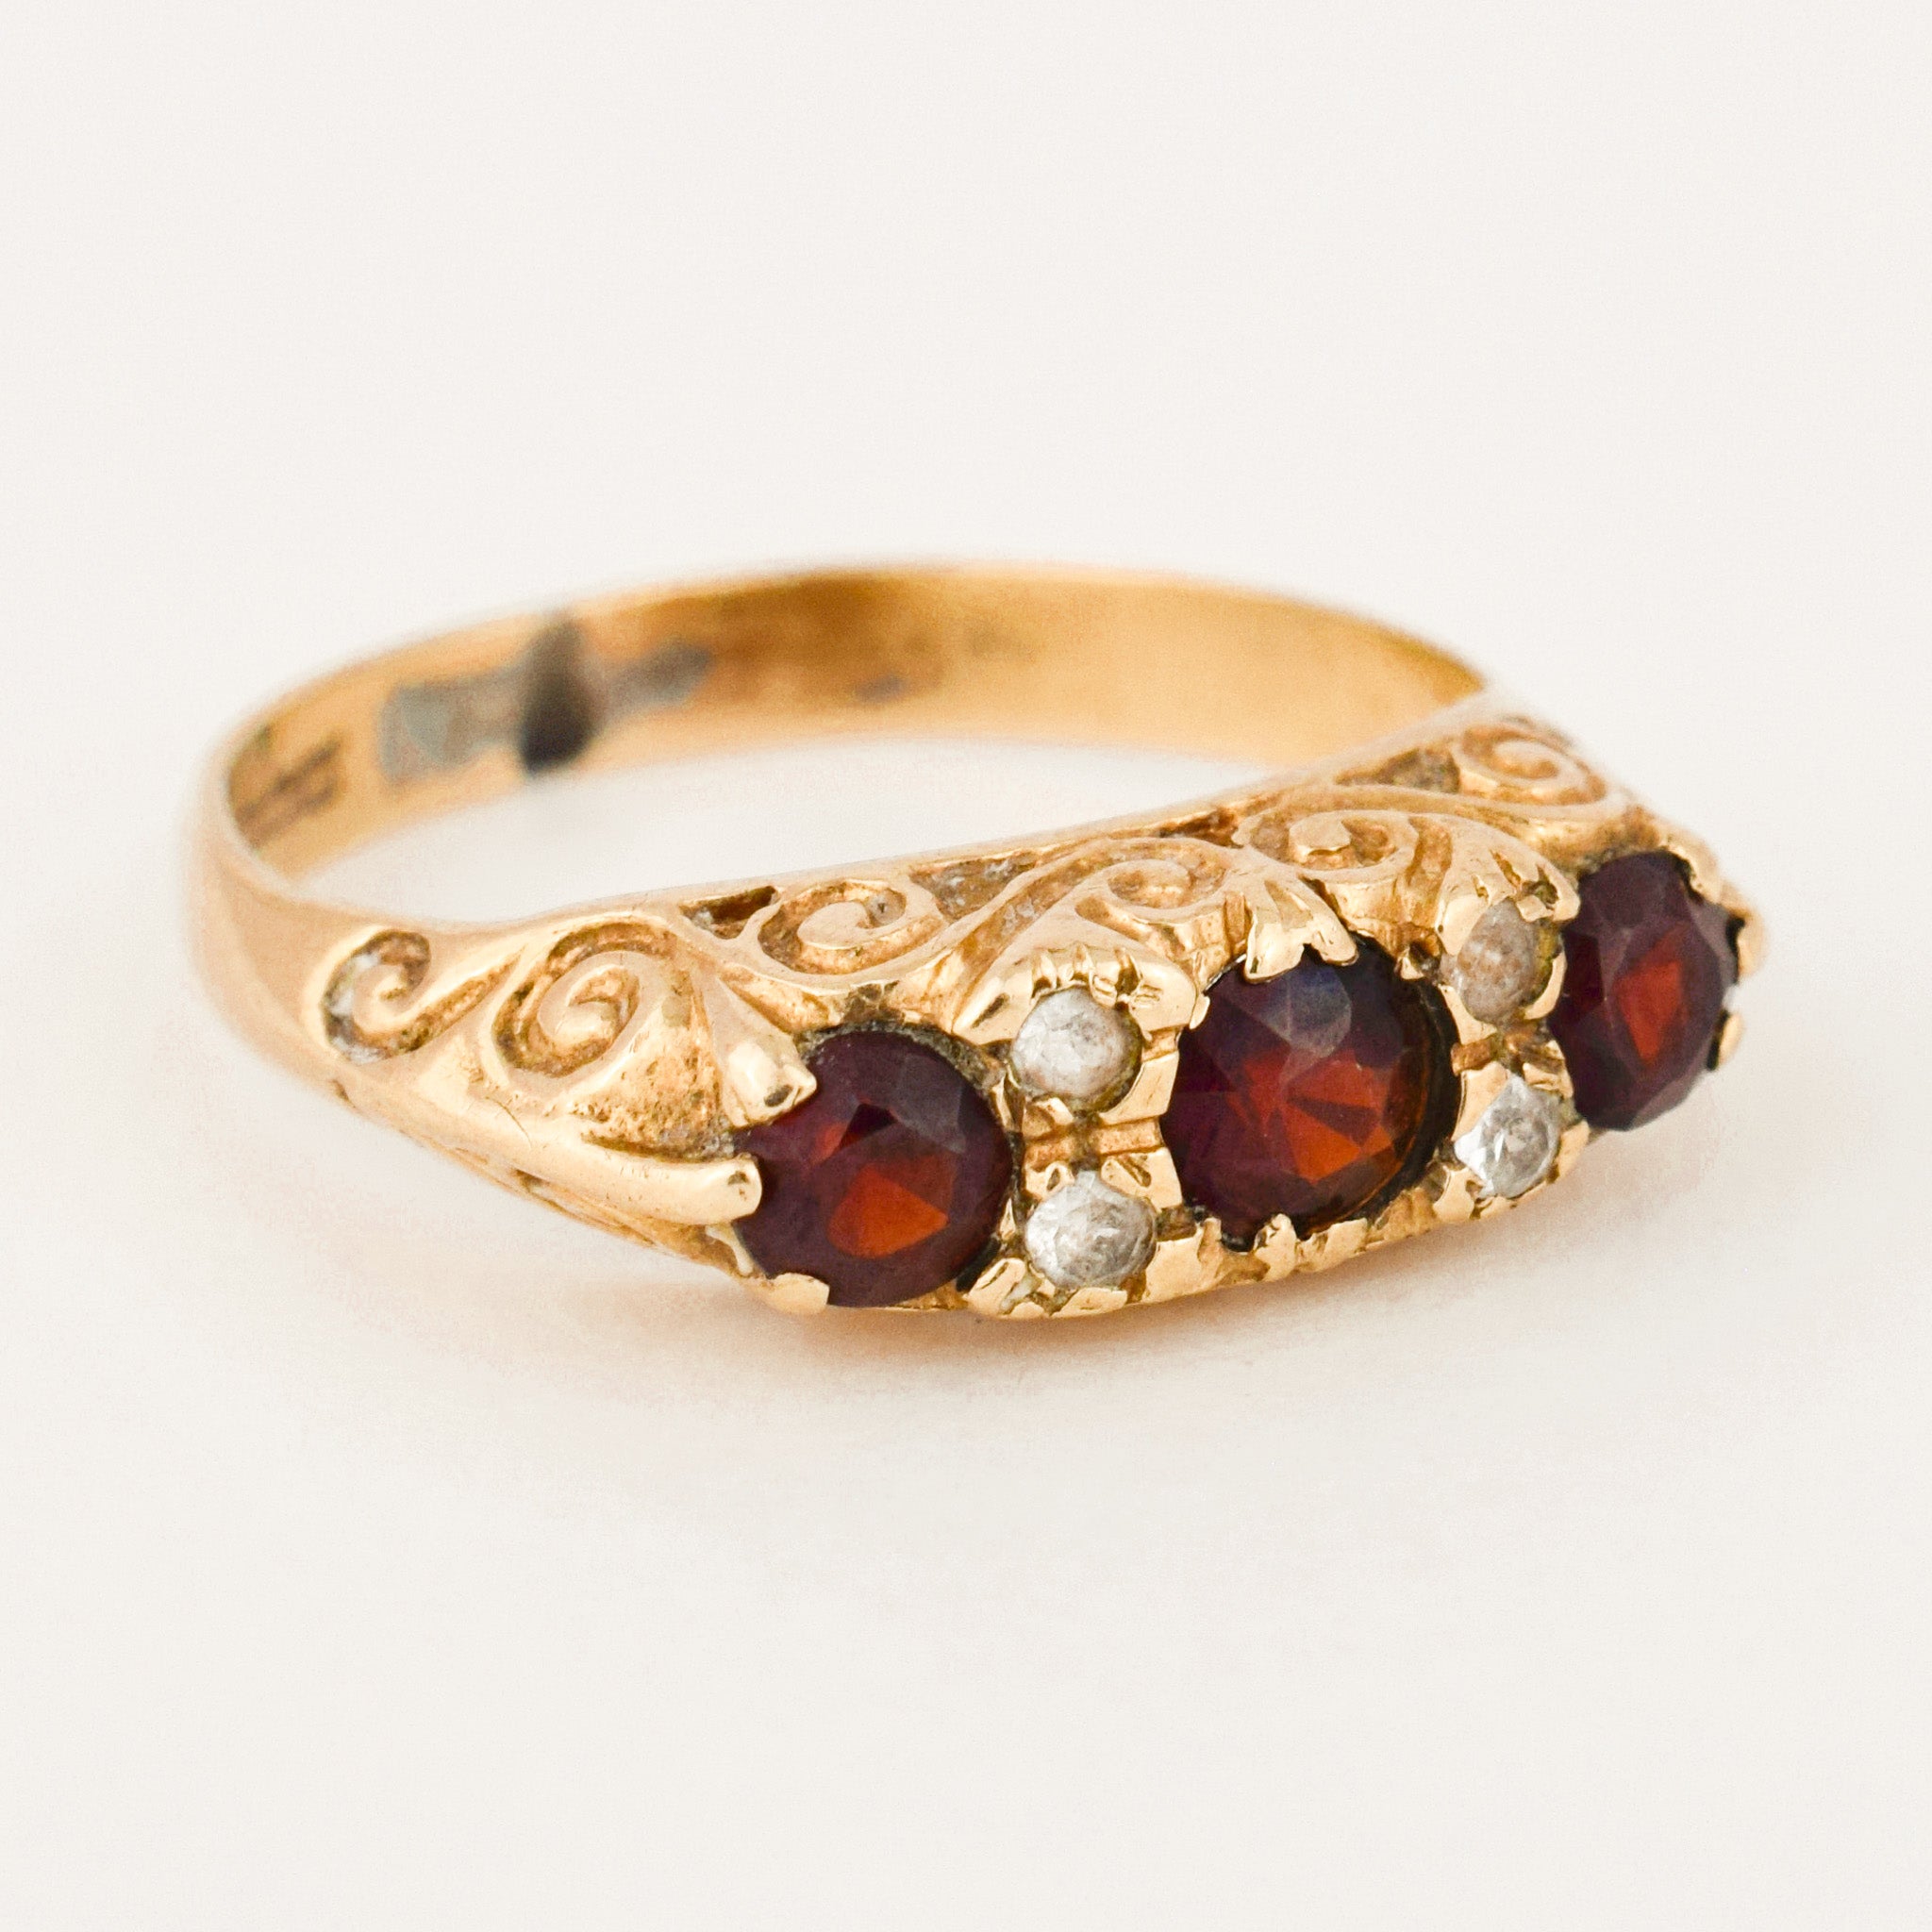 Antique Garnet and Cubic Zirconia Trilogy Ring